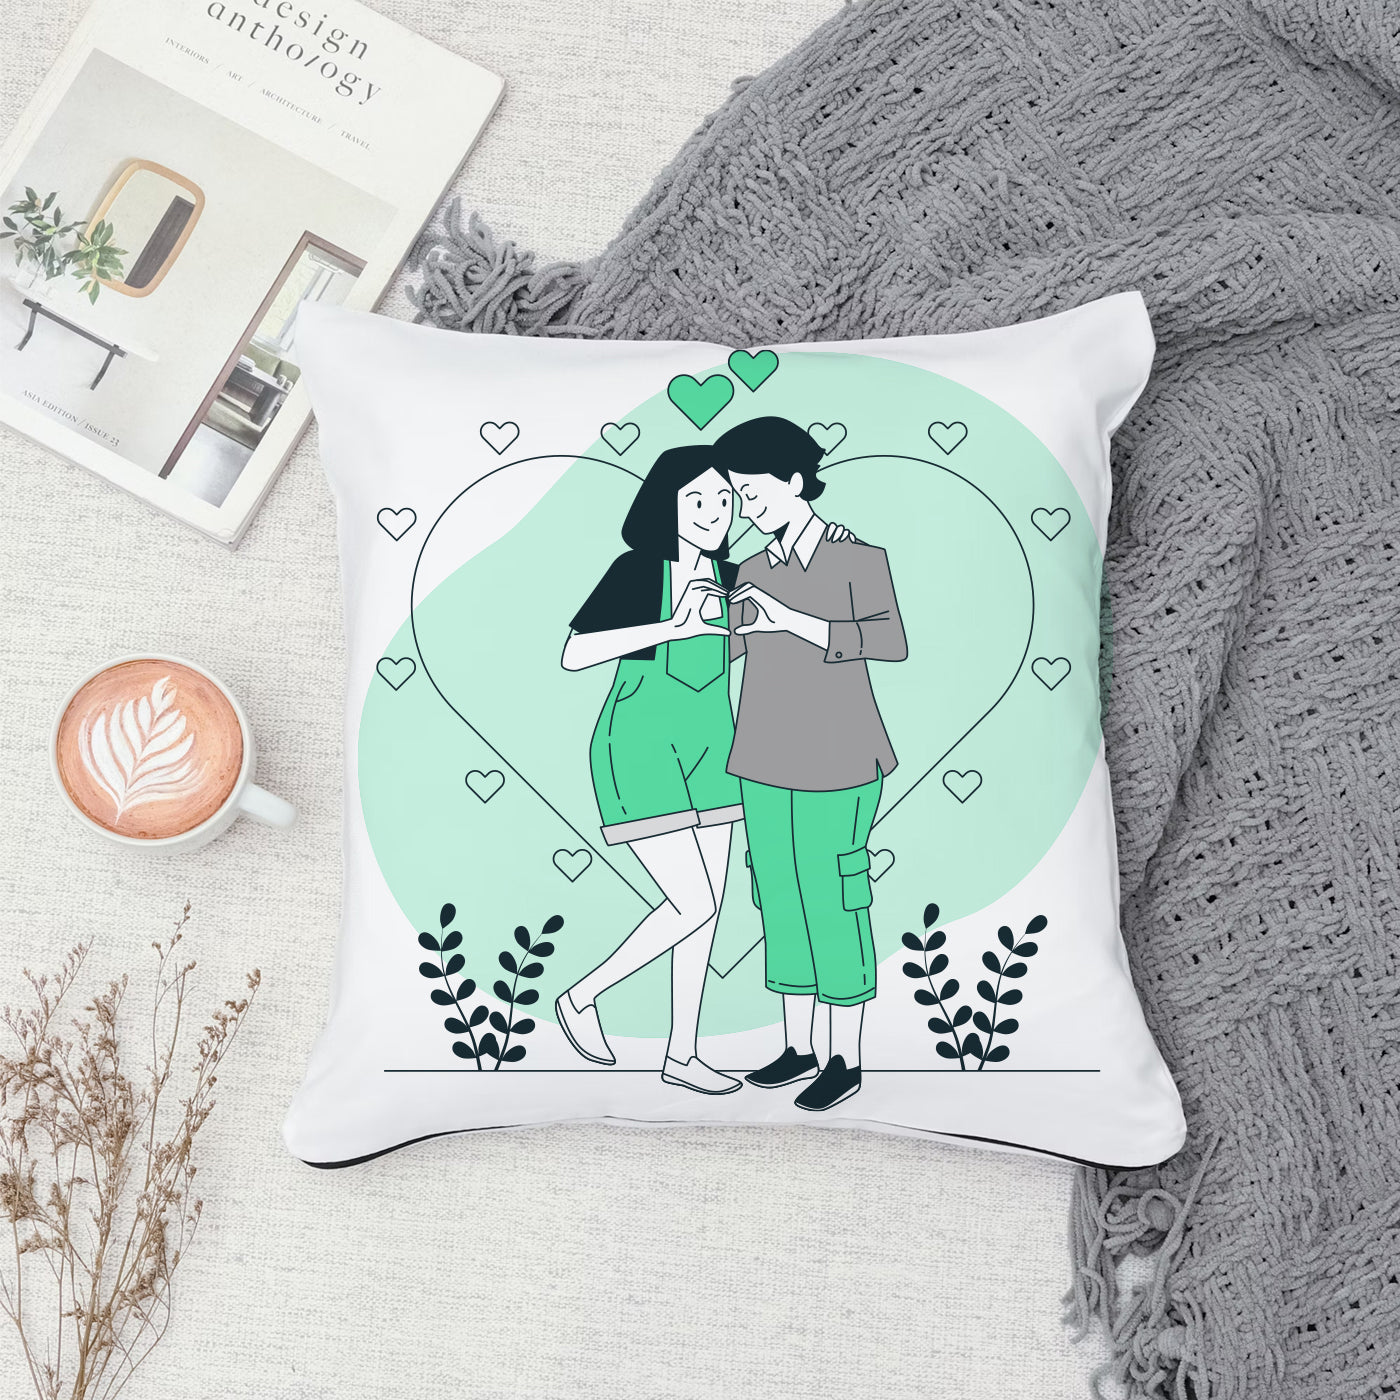 Set of 2 Printed Cushion And Mug Special Unique Birthday, Wedding, Anniversary Gifts